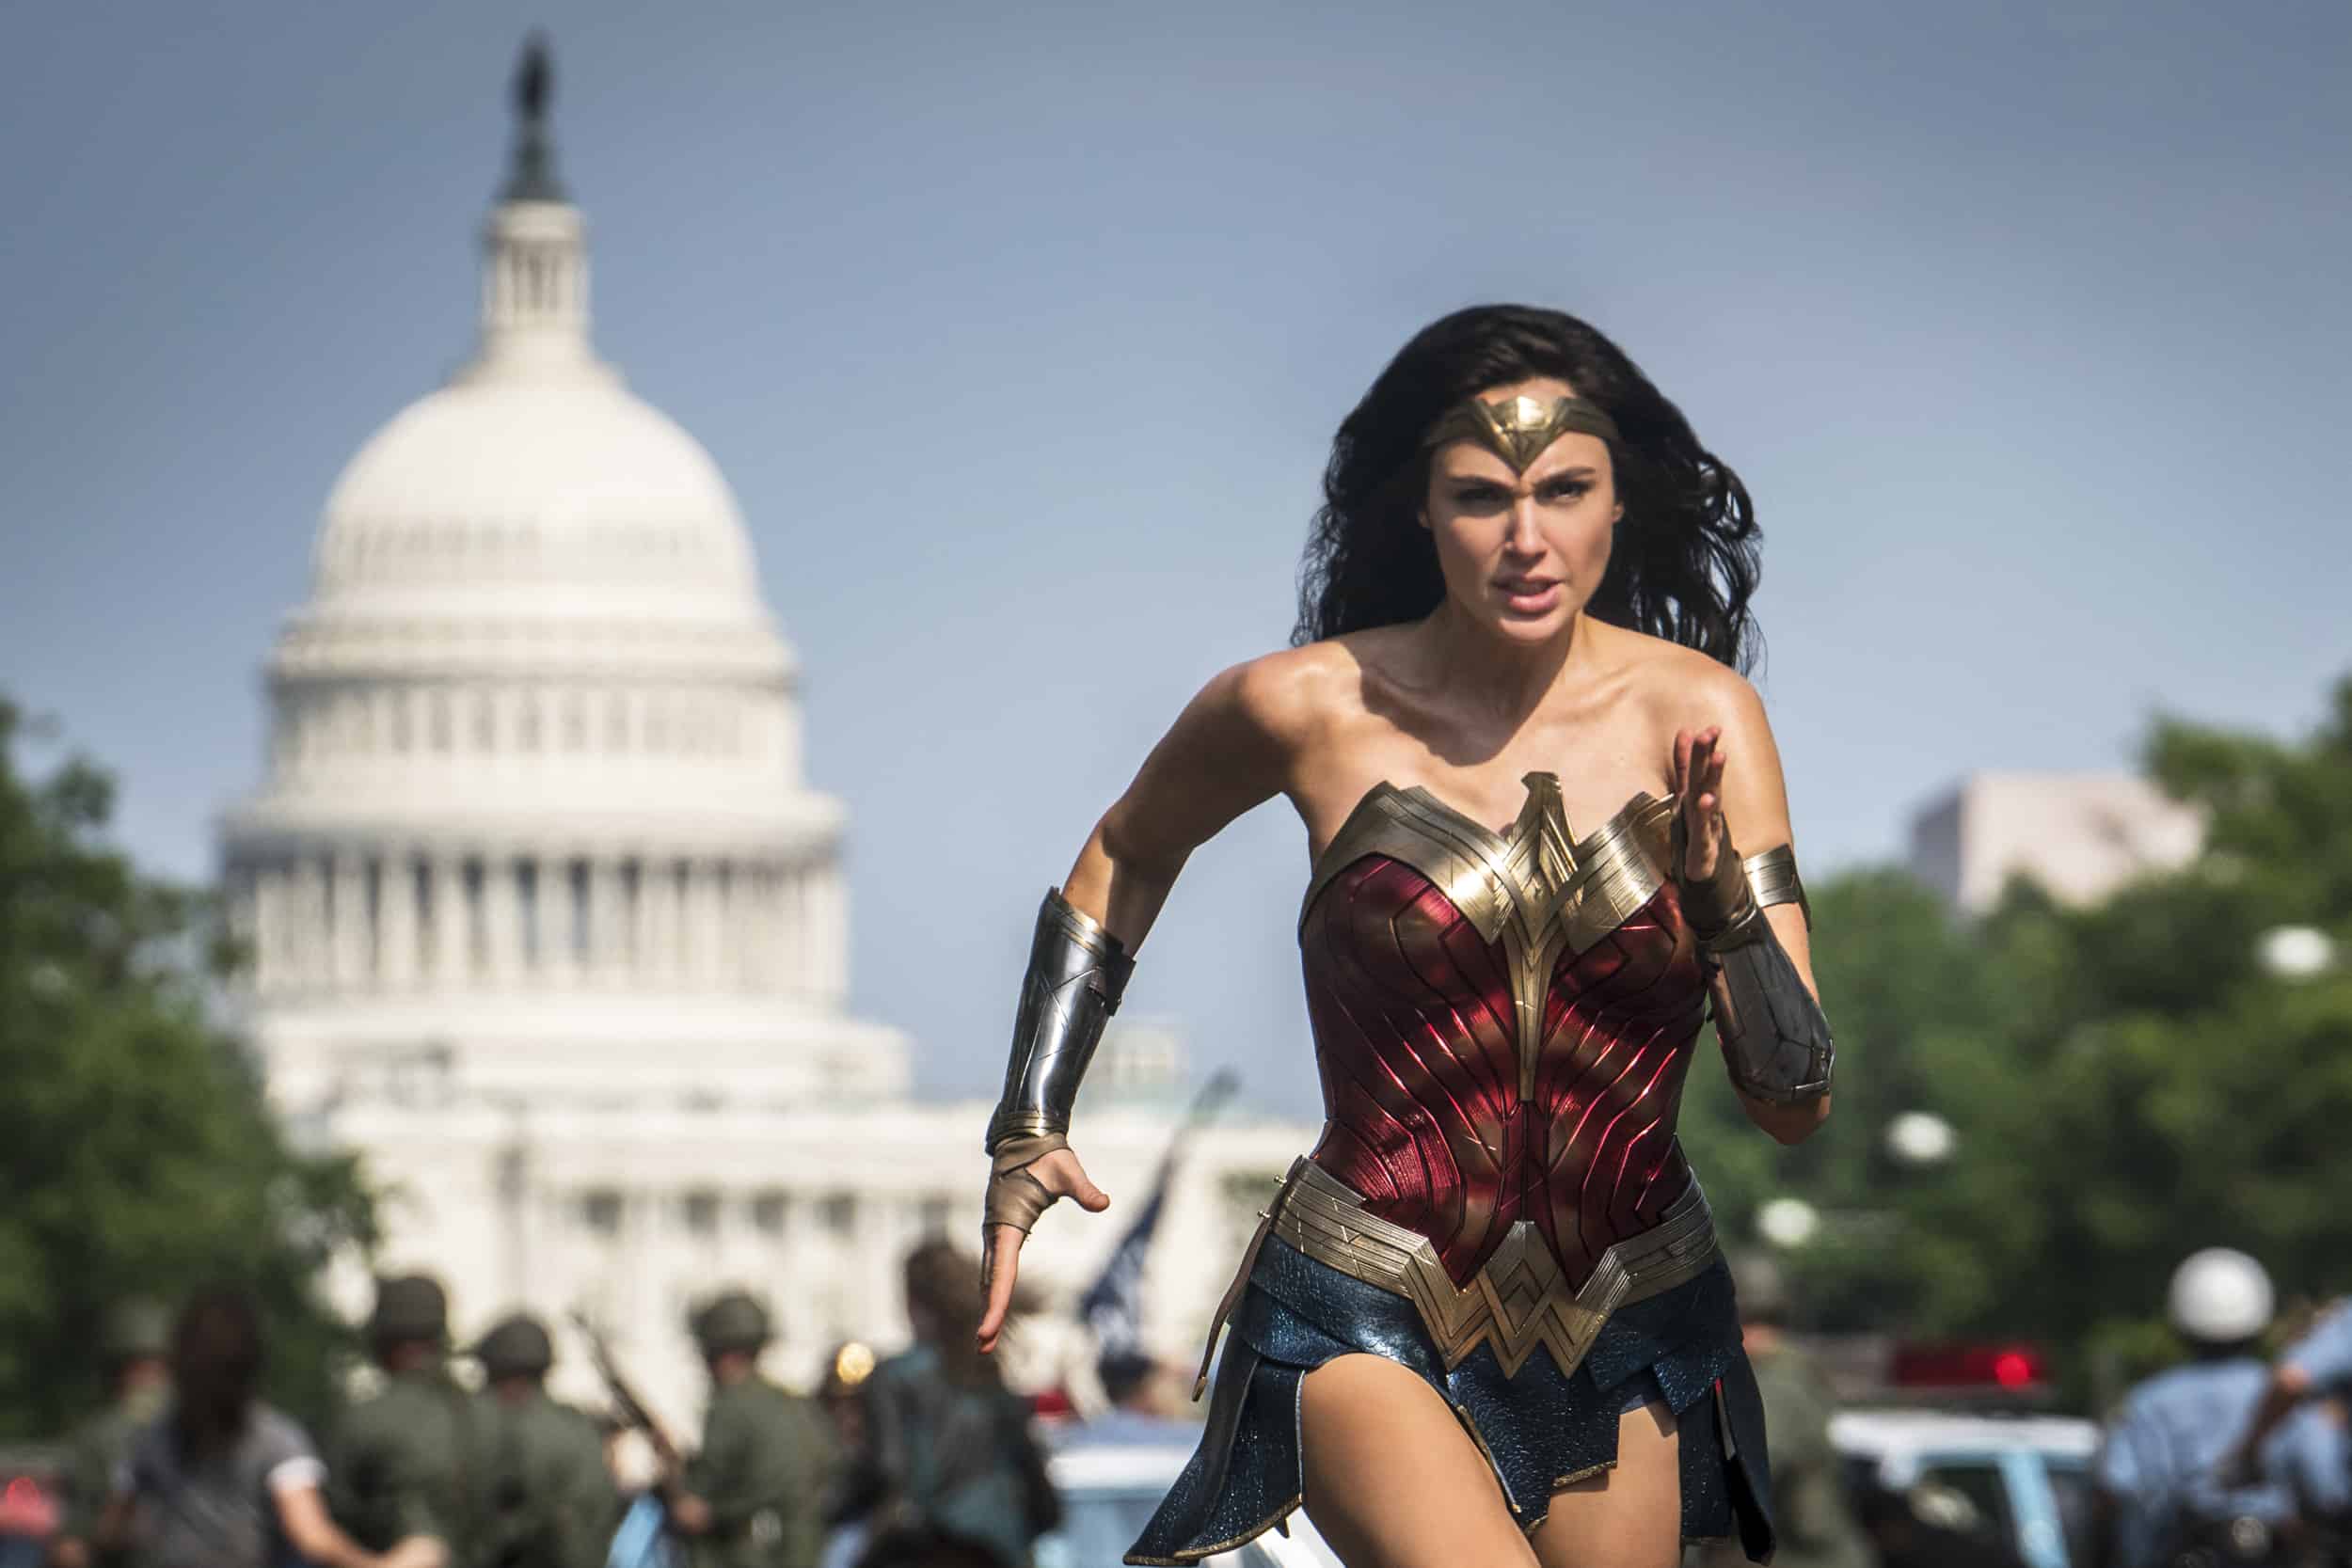 Review: The True Villain in “Wonder Woman 1984” Isn’t Who You Think